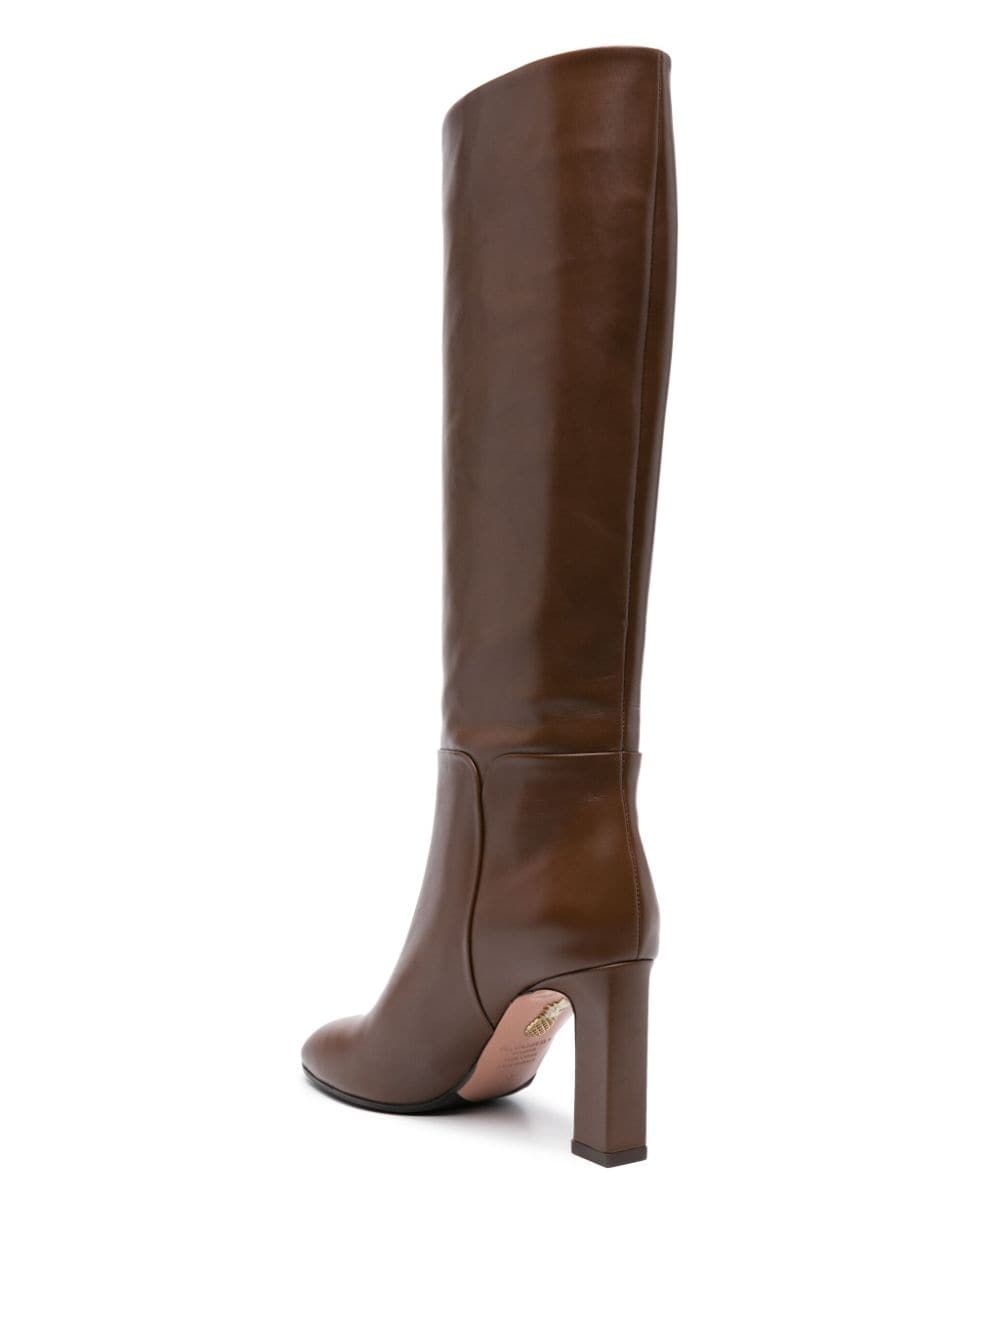 Sellier 85mm leather boots - 3